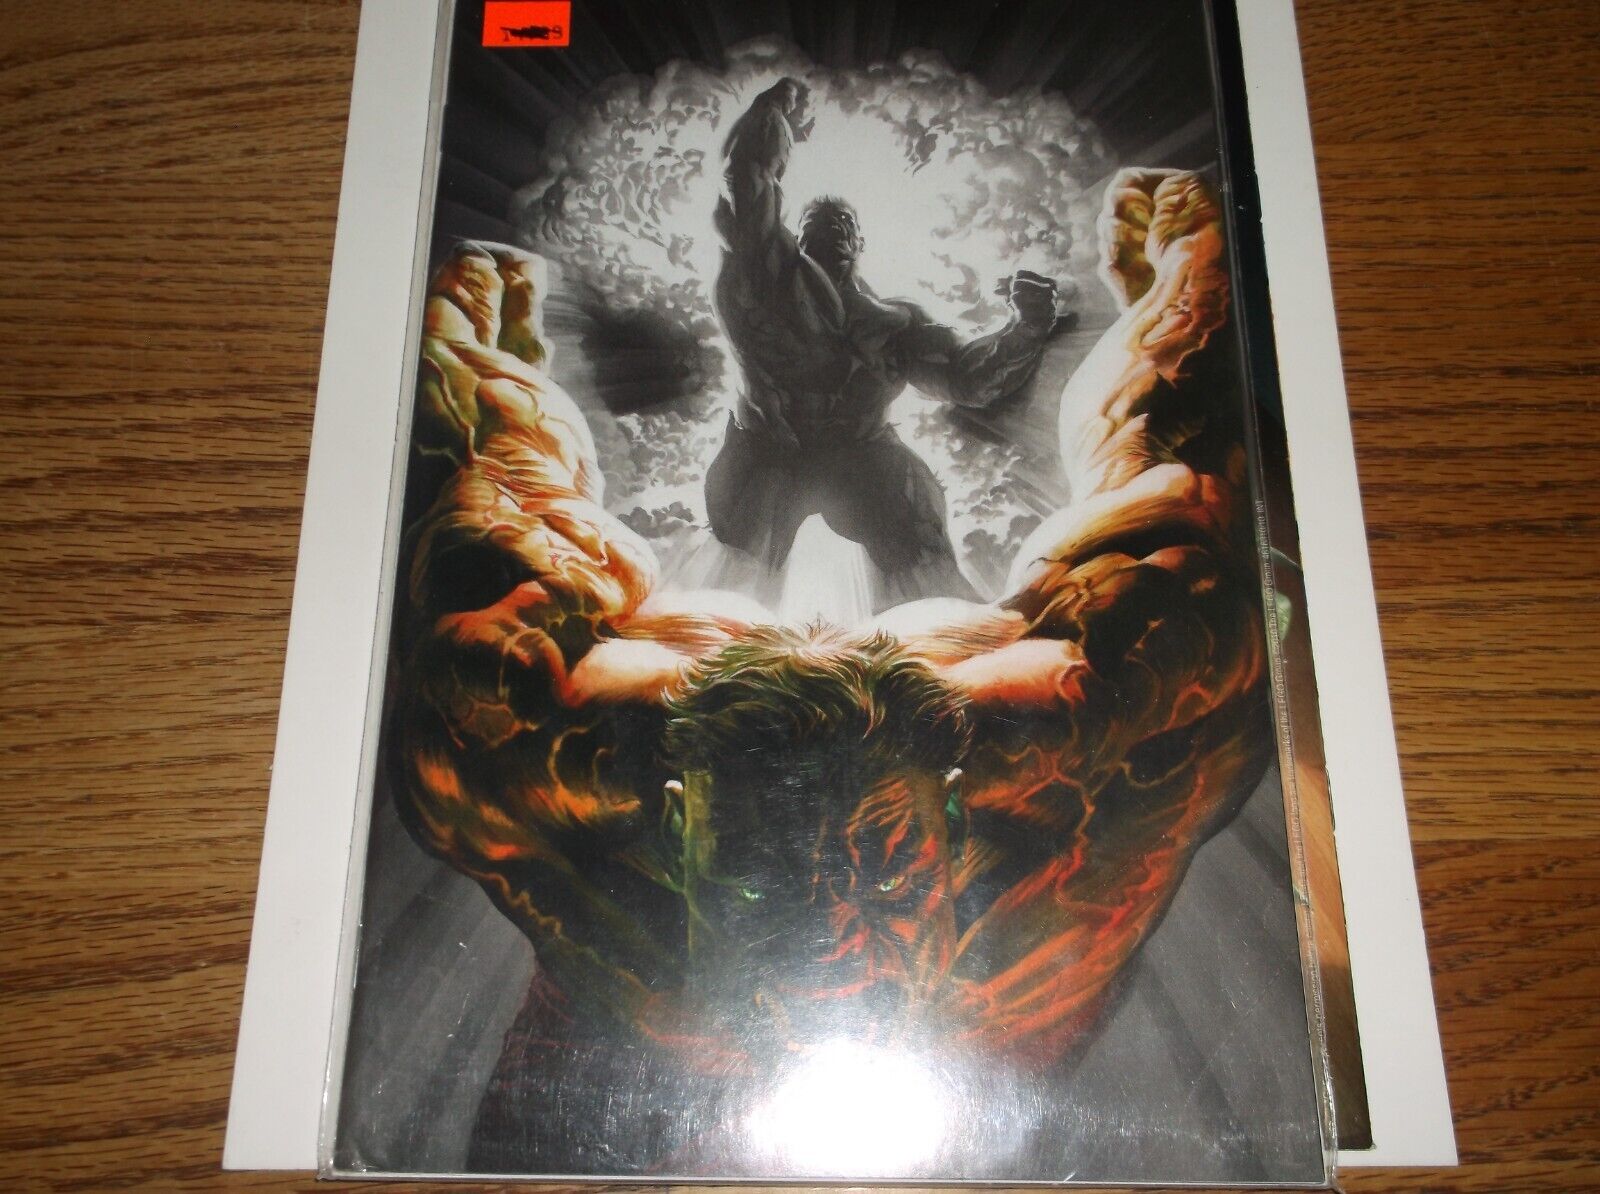 INCREDIBLE HULK #600-(Dynamic Forces Limited to 1499)-Still Sealed